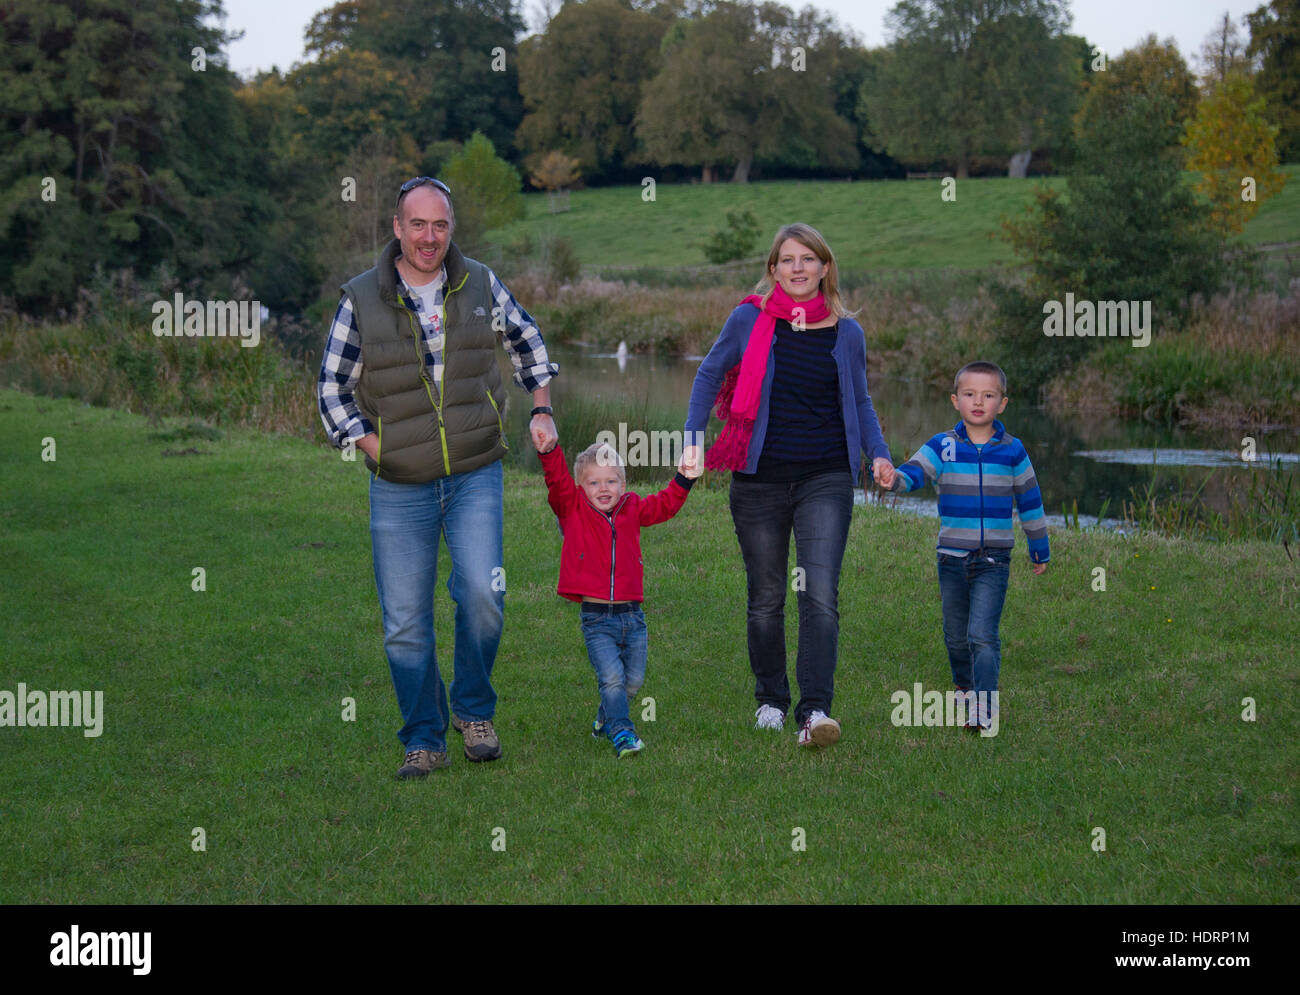 A young family with mother, father and 2 young boys, walking in the countryside. Stock Photo